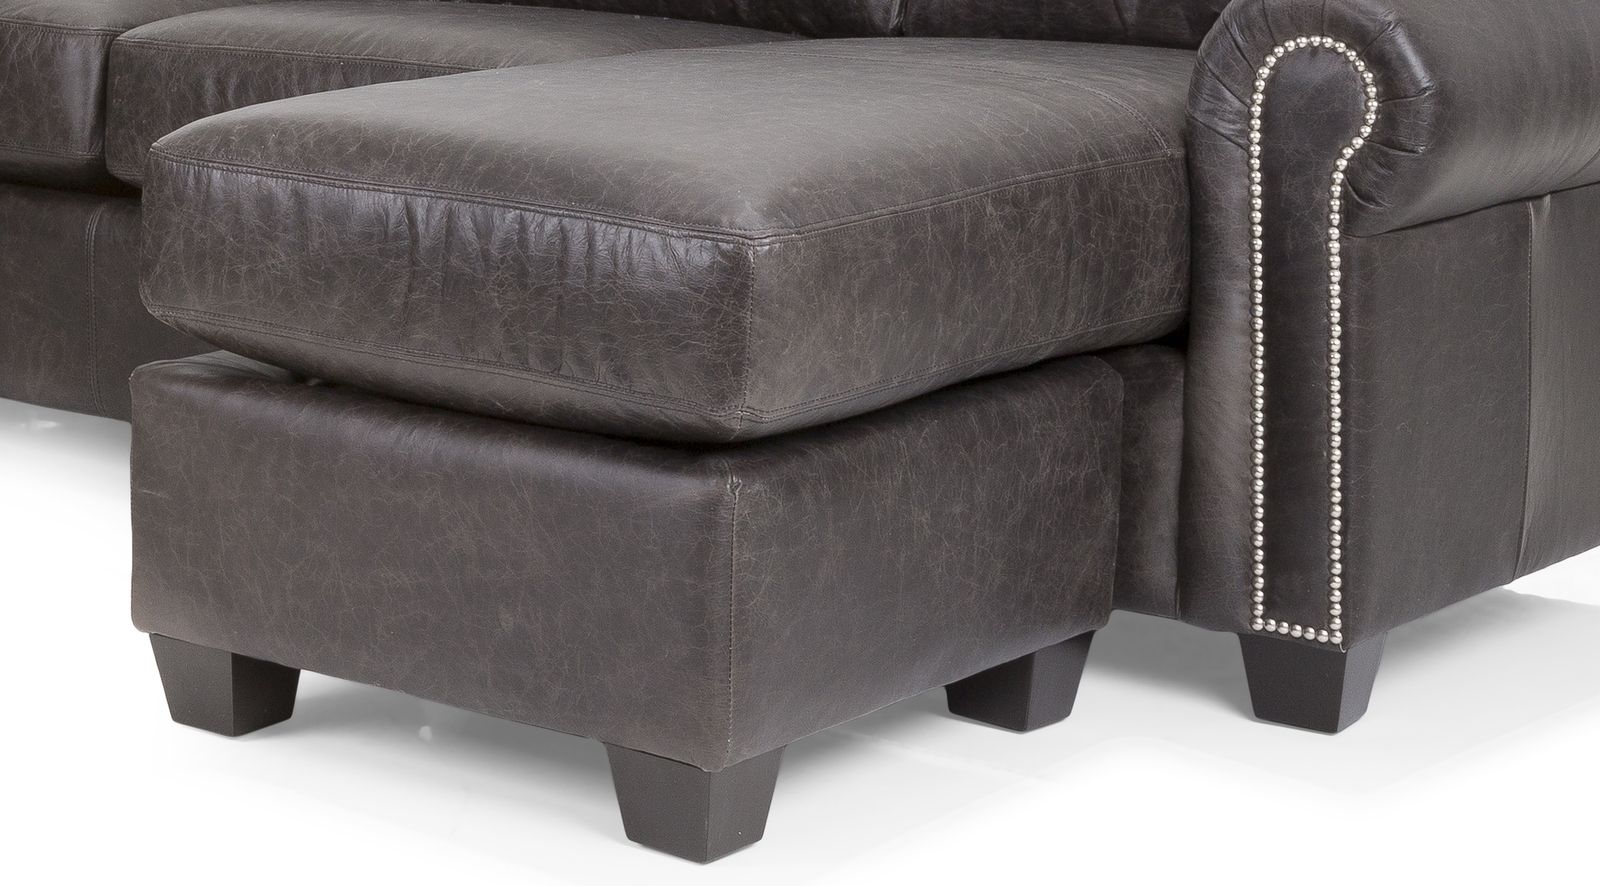 3a 25 Ottoman | Decor Rest Furniture Ltd. With Floating Ottomans (Gallery 6 of 20)